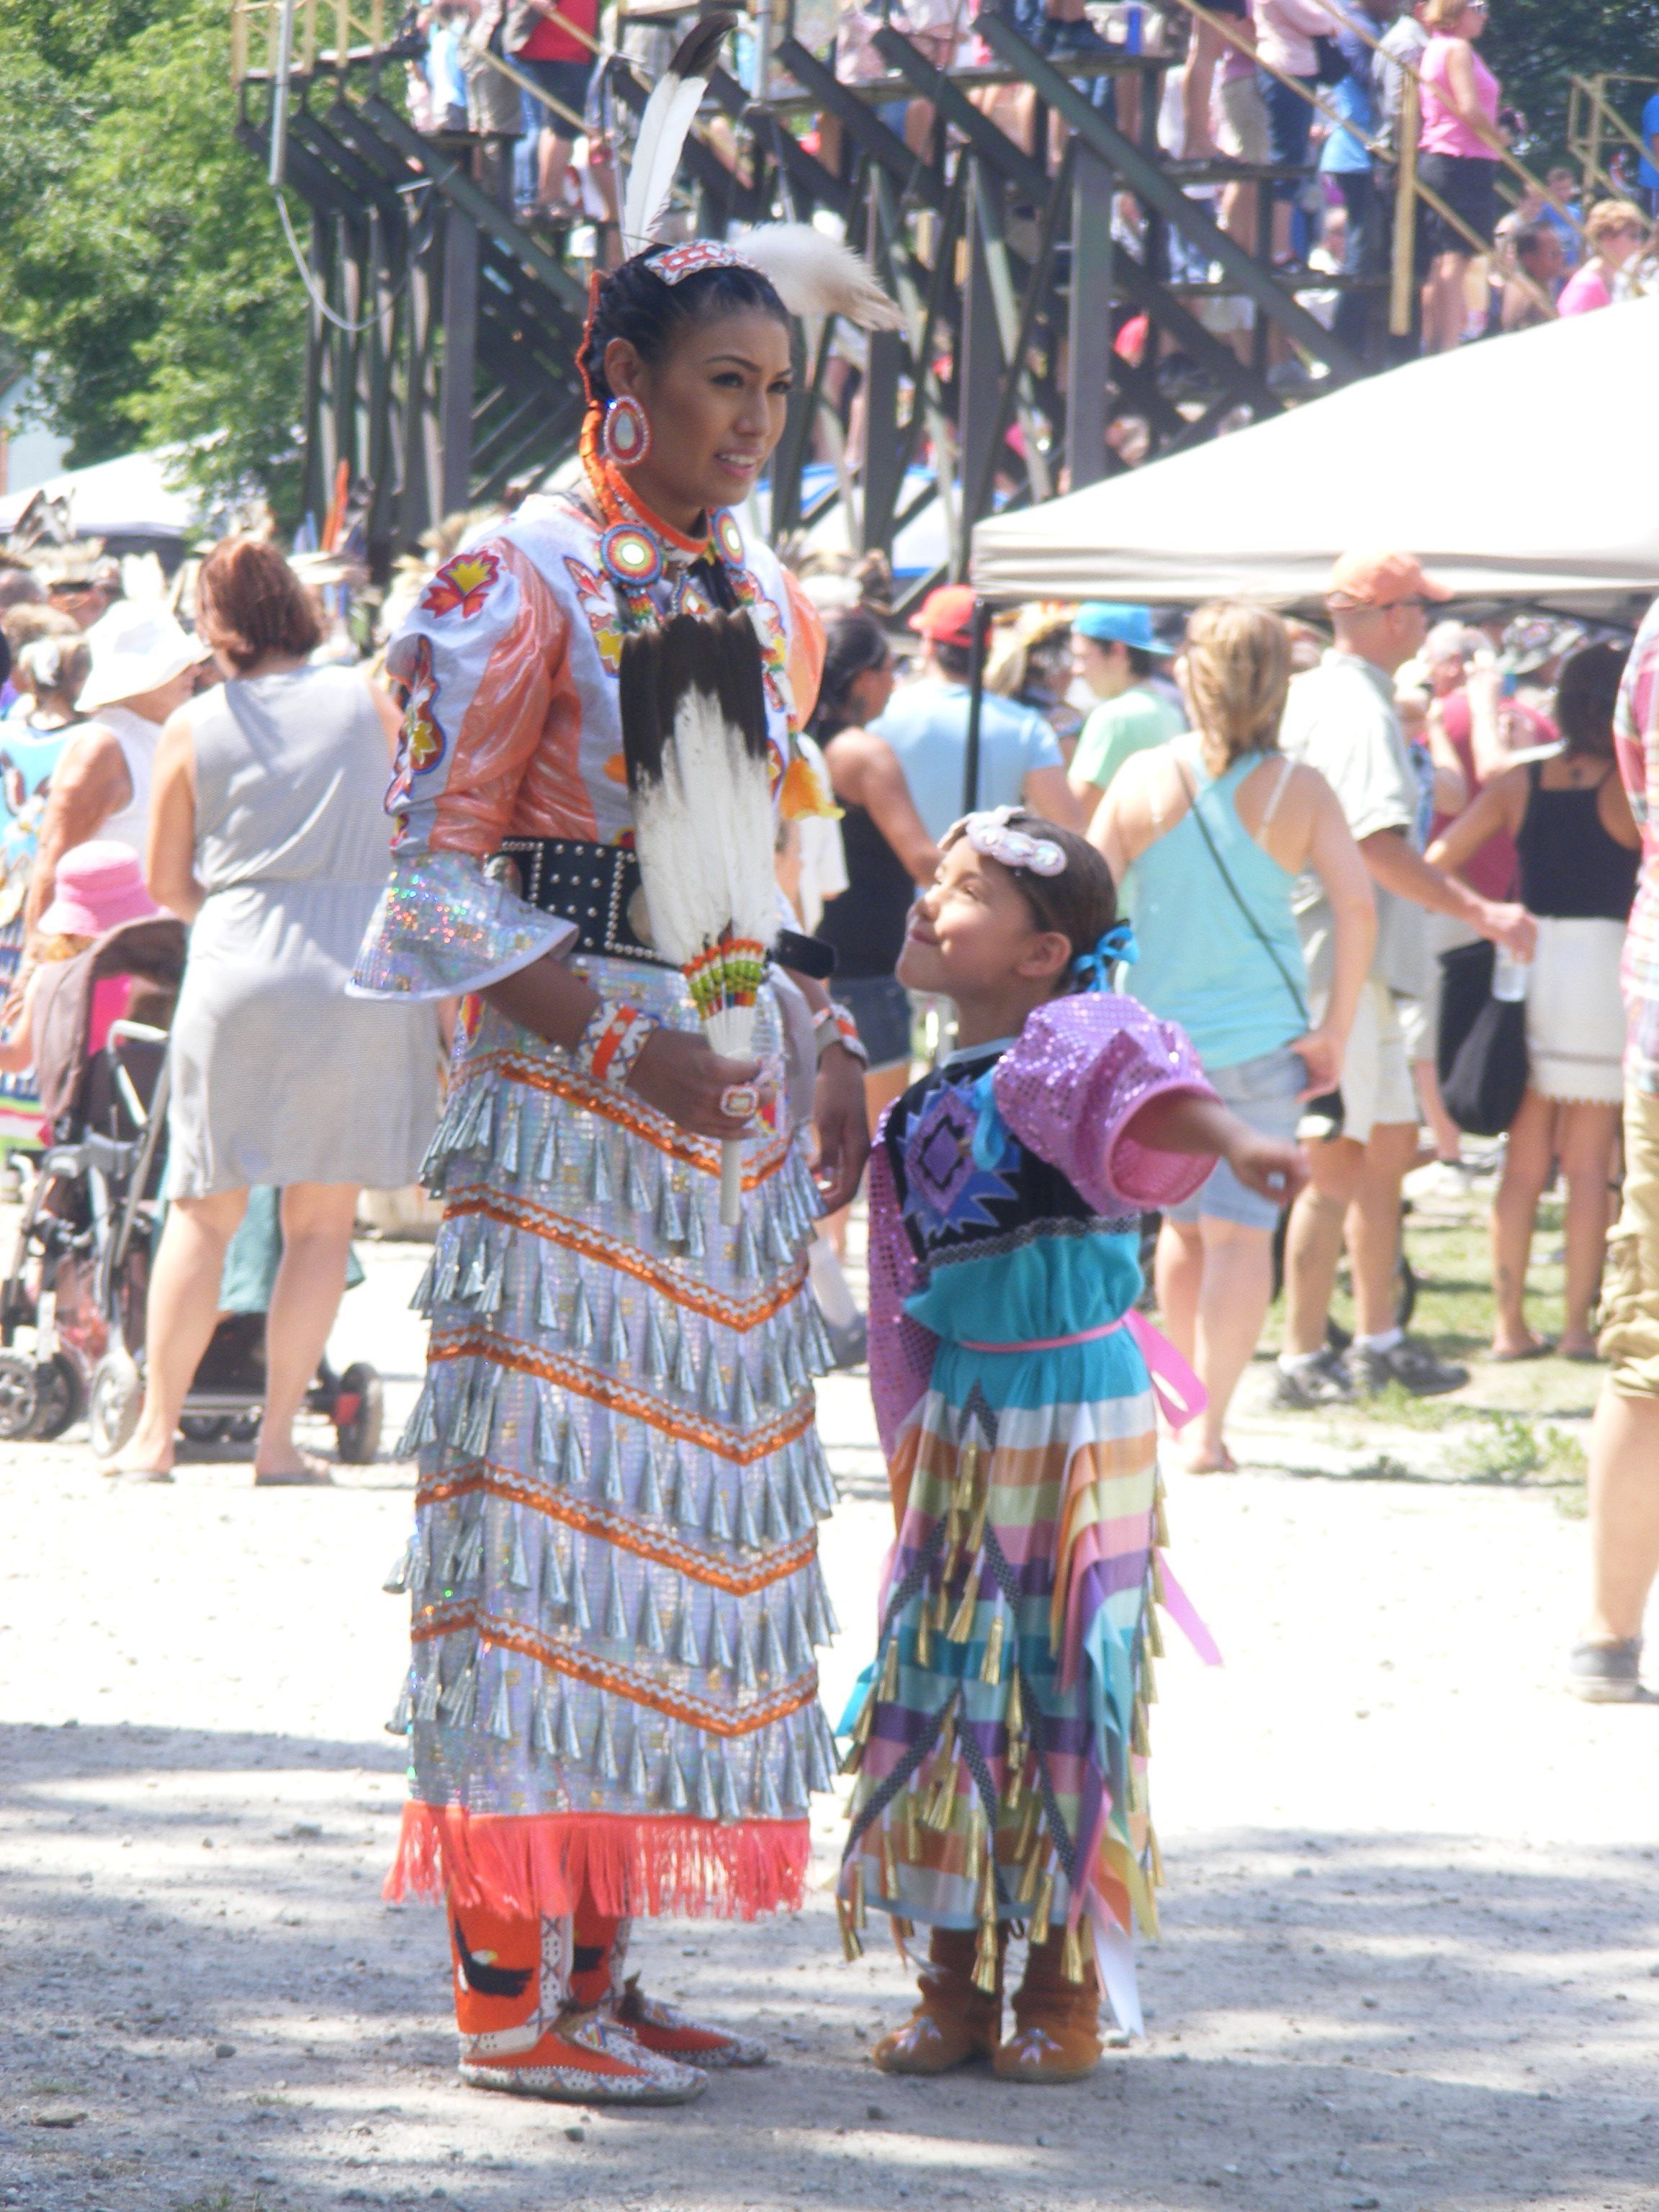 An indigenous woman and child in traditional dancing clothes at a pow pow on a sunny day. The child is pointing and speaking to the woman, who is smiling. Grandstands and a crowd are in the background.